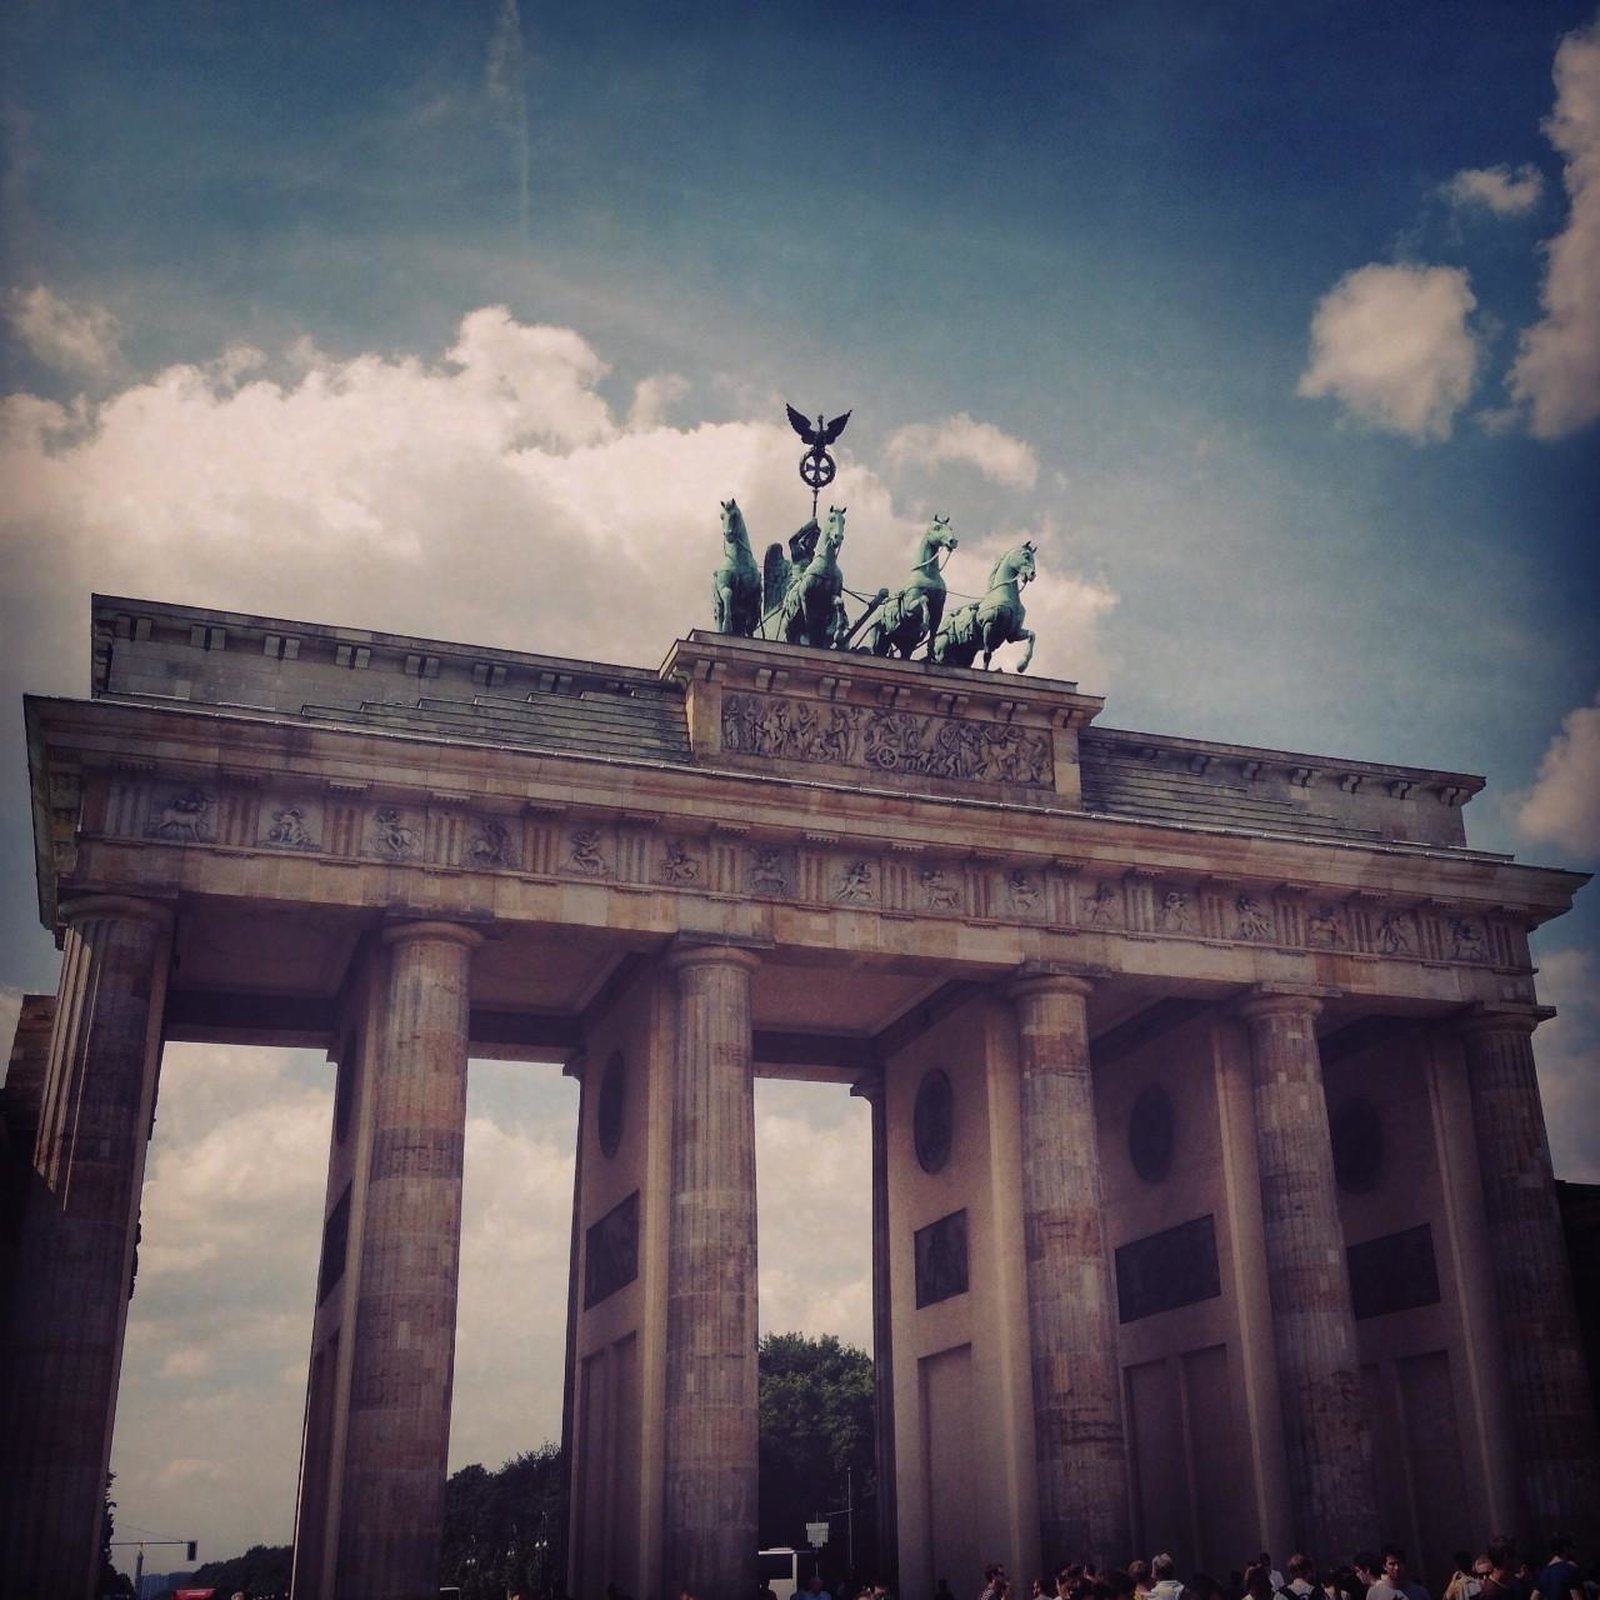 A picture of the Brandenburg Gate